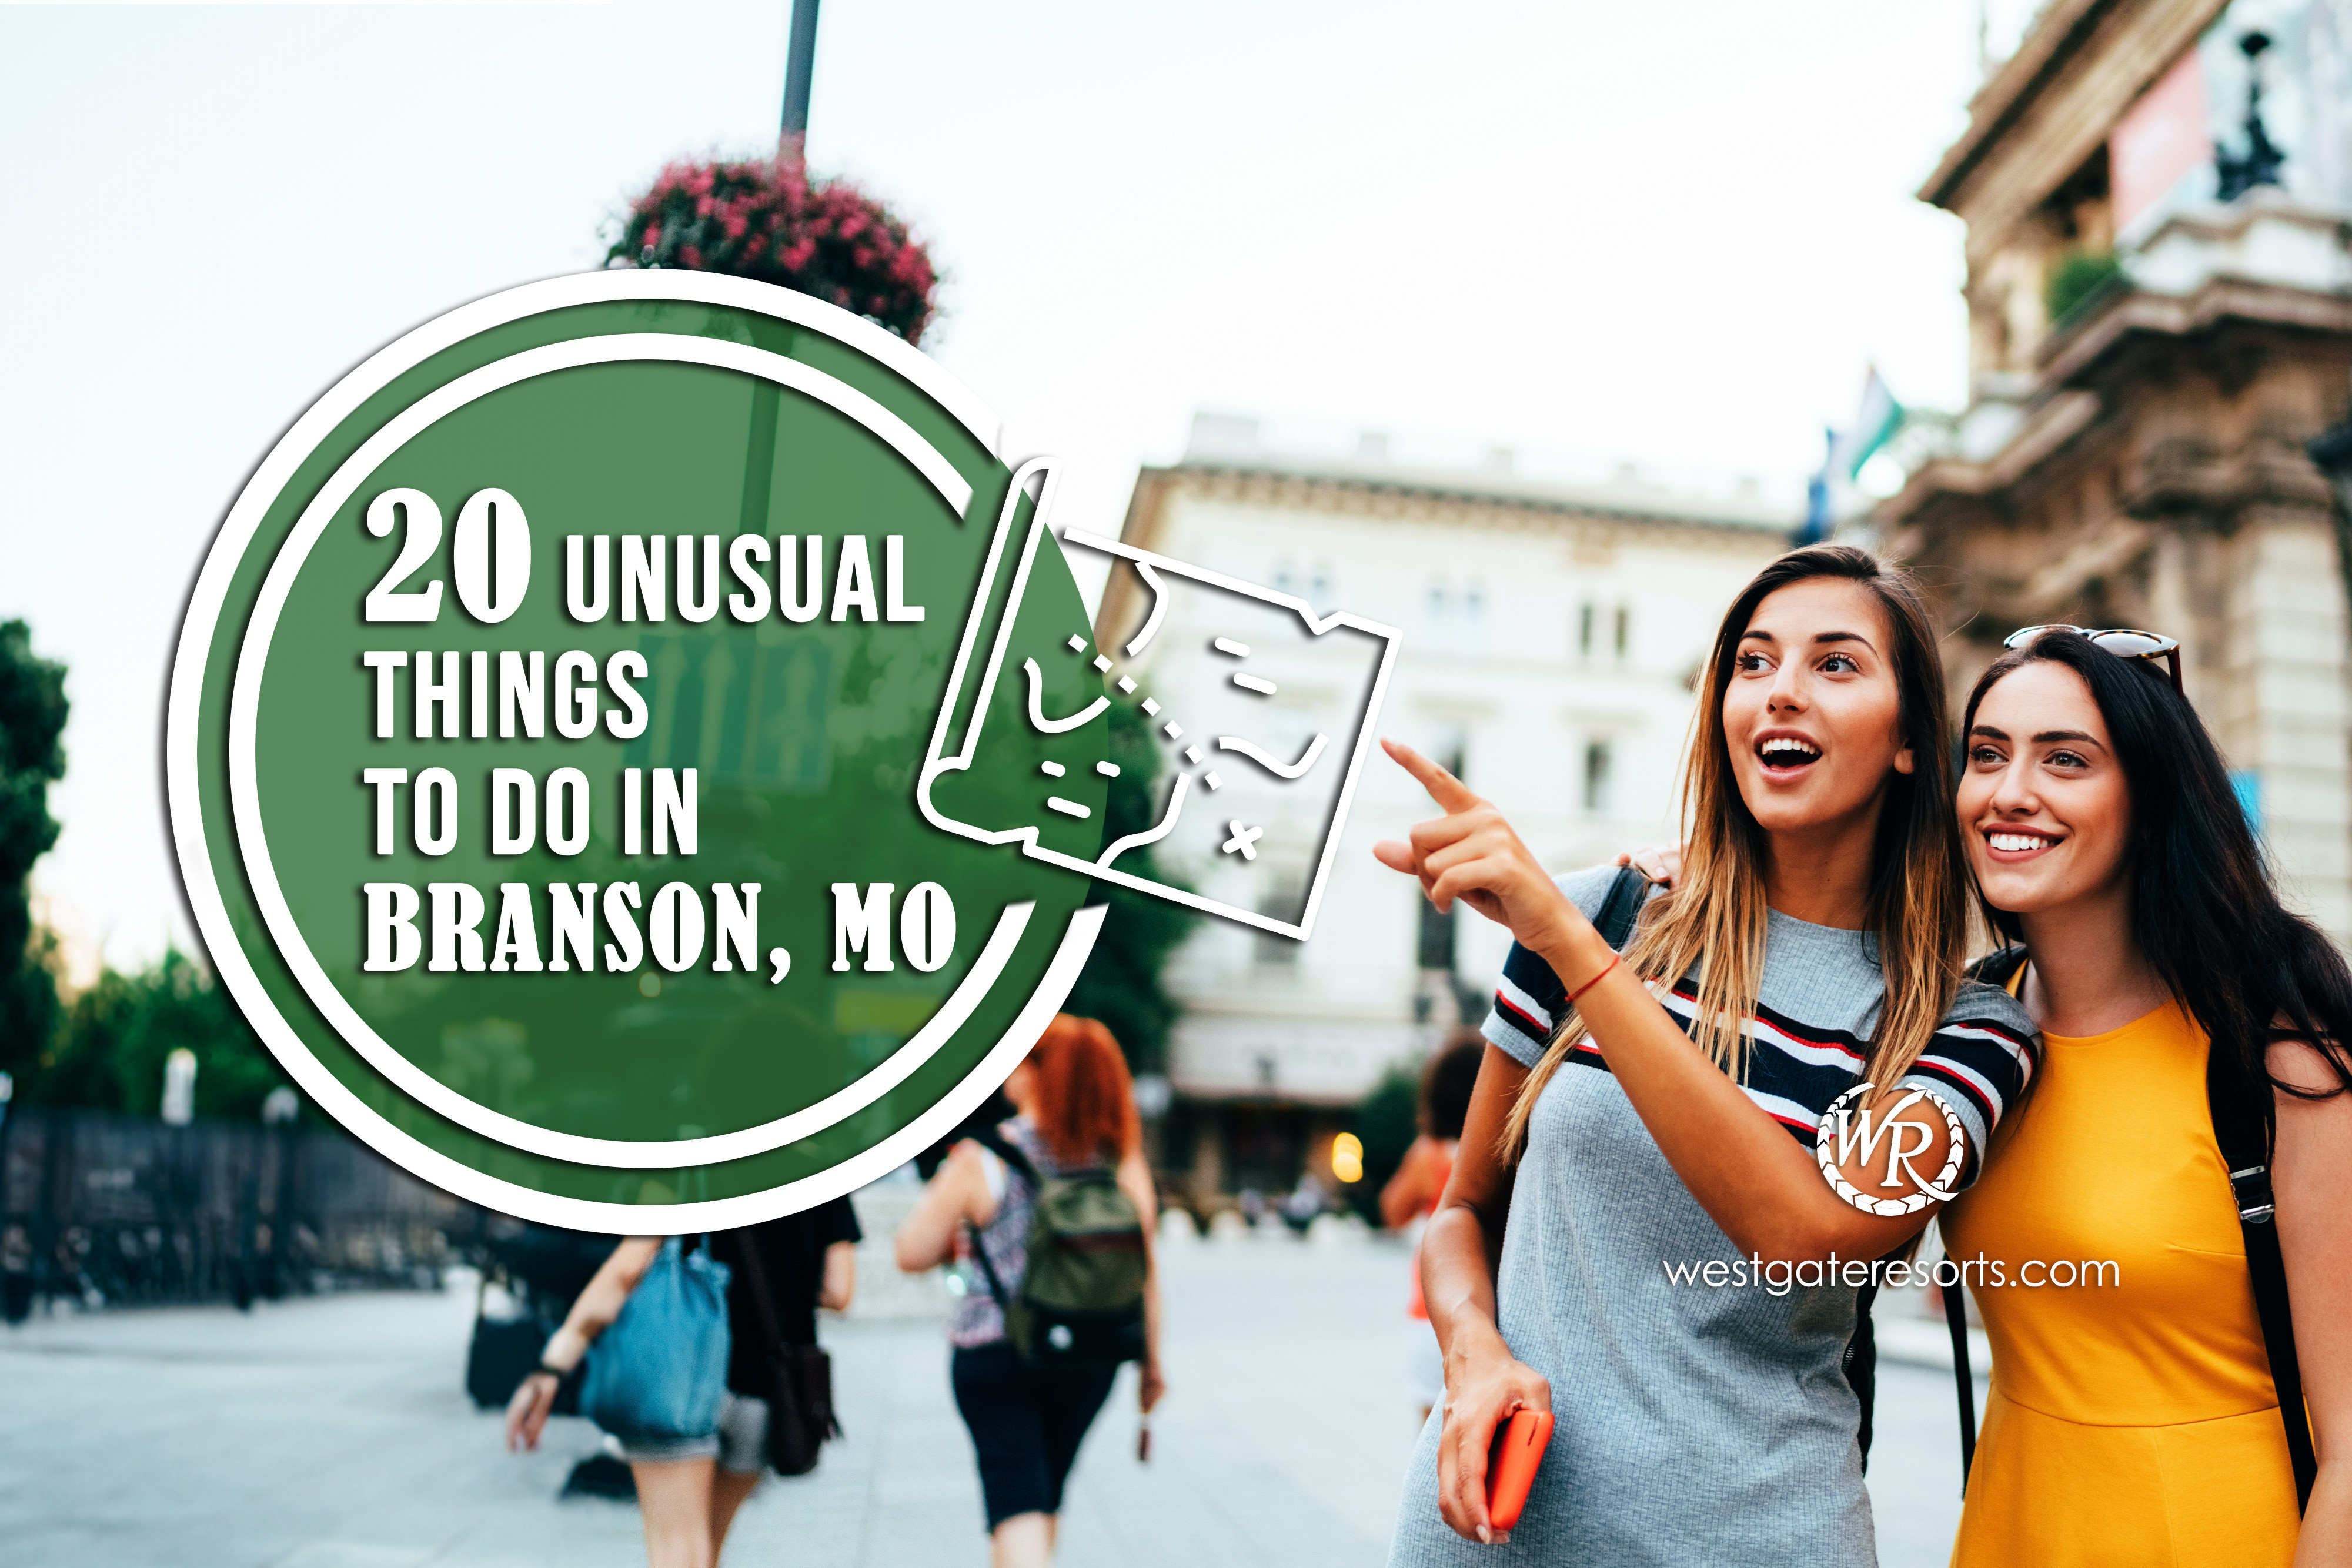 20 Unusual Things to Do in Branson